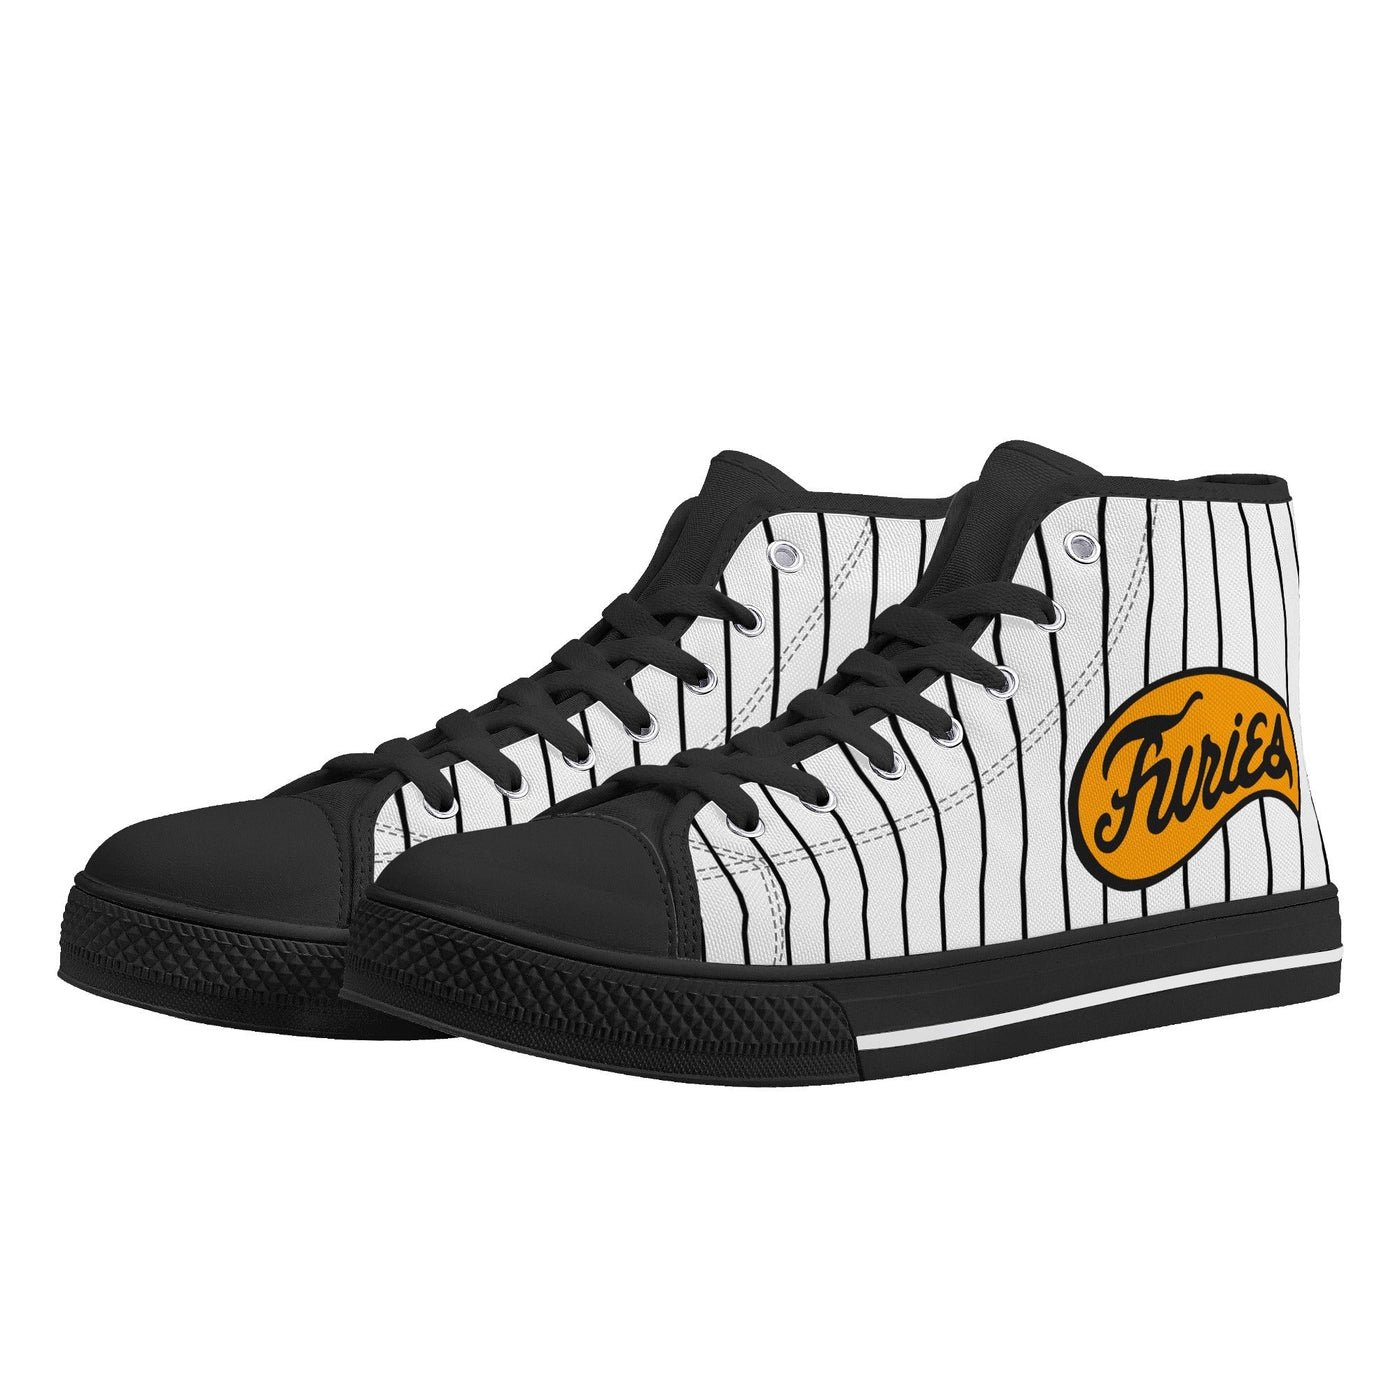 The Furies High-Top Canvas Sneakers - Iconic baseball Gang in The Warriors Movie